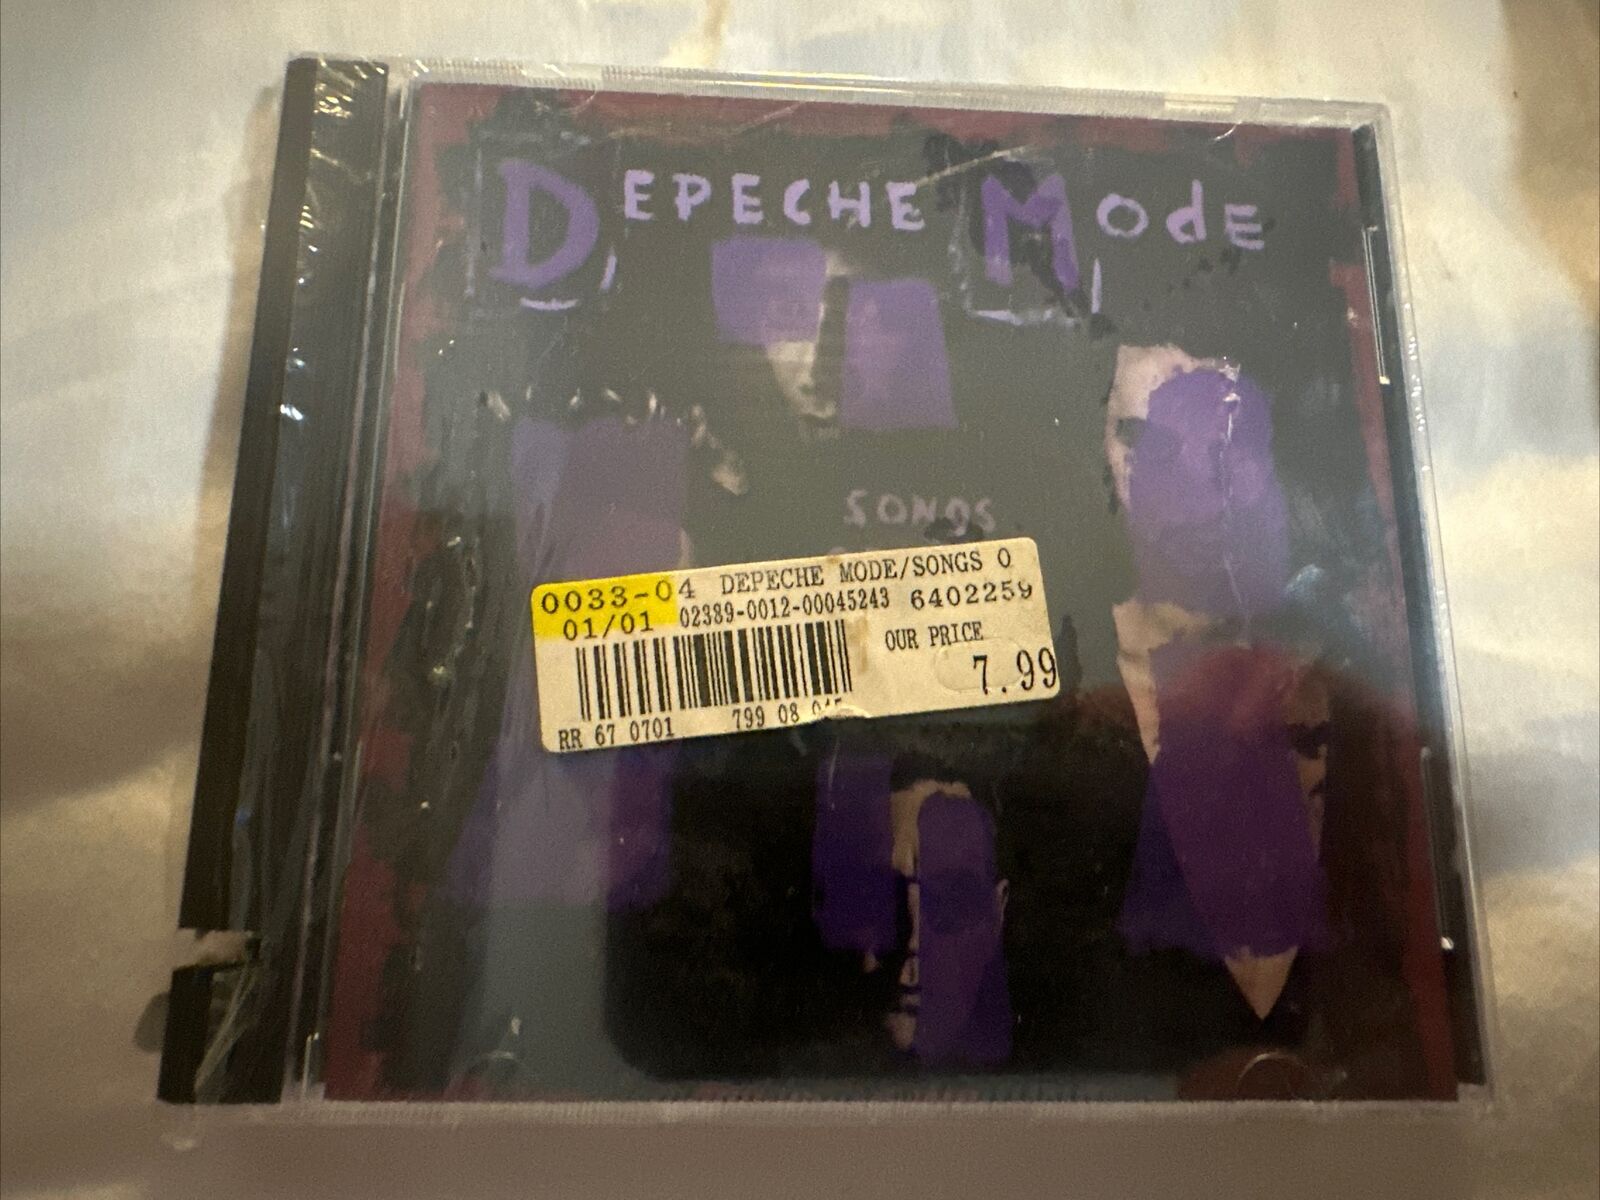 Depeche Mode - Songs Of Faith And Devotion (CD, 1993) POP - FACTORY SEALED